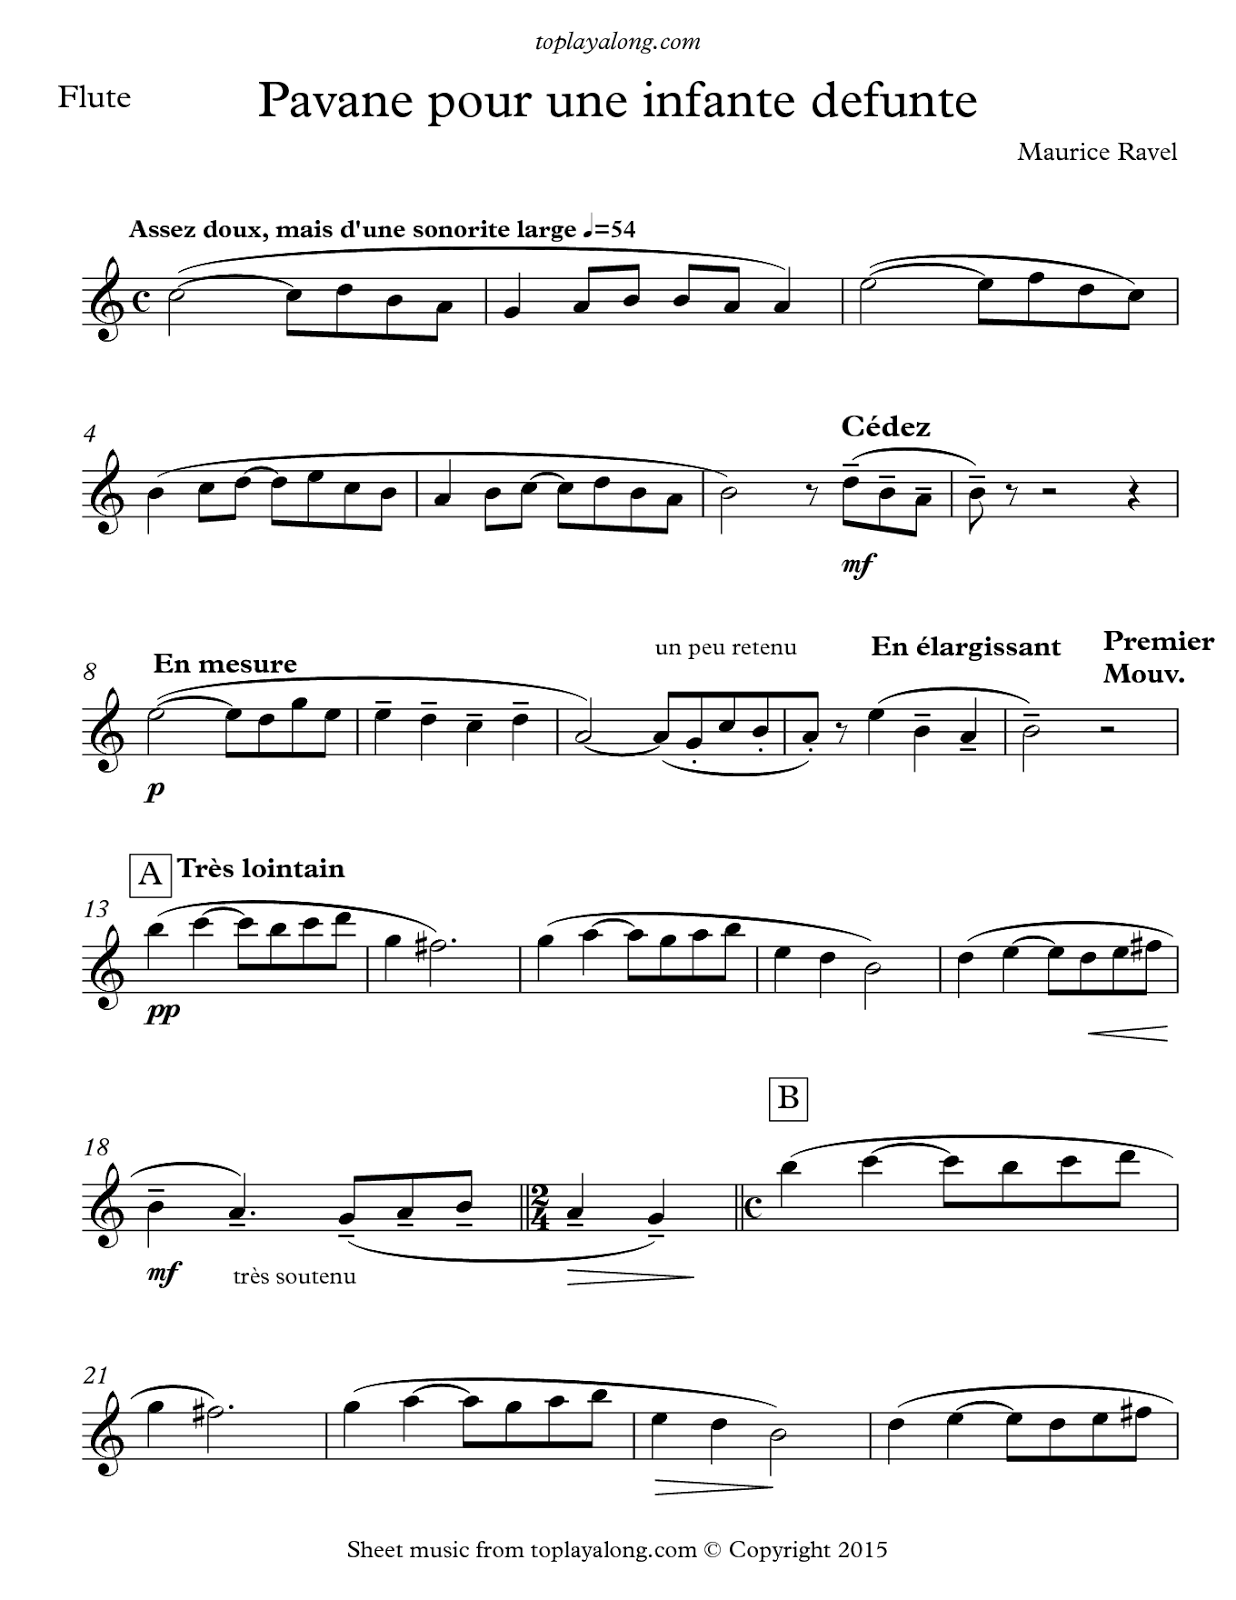 #1, Introduction, the first two meaures of Ravel's Pavane for a dead ...